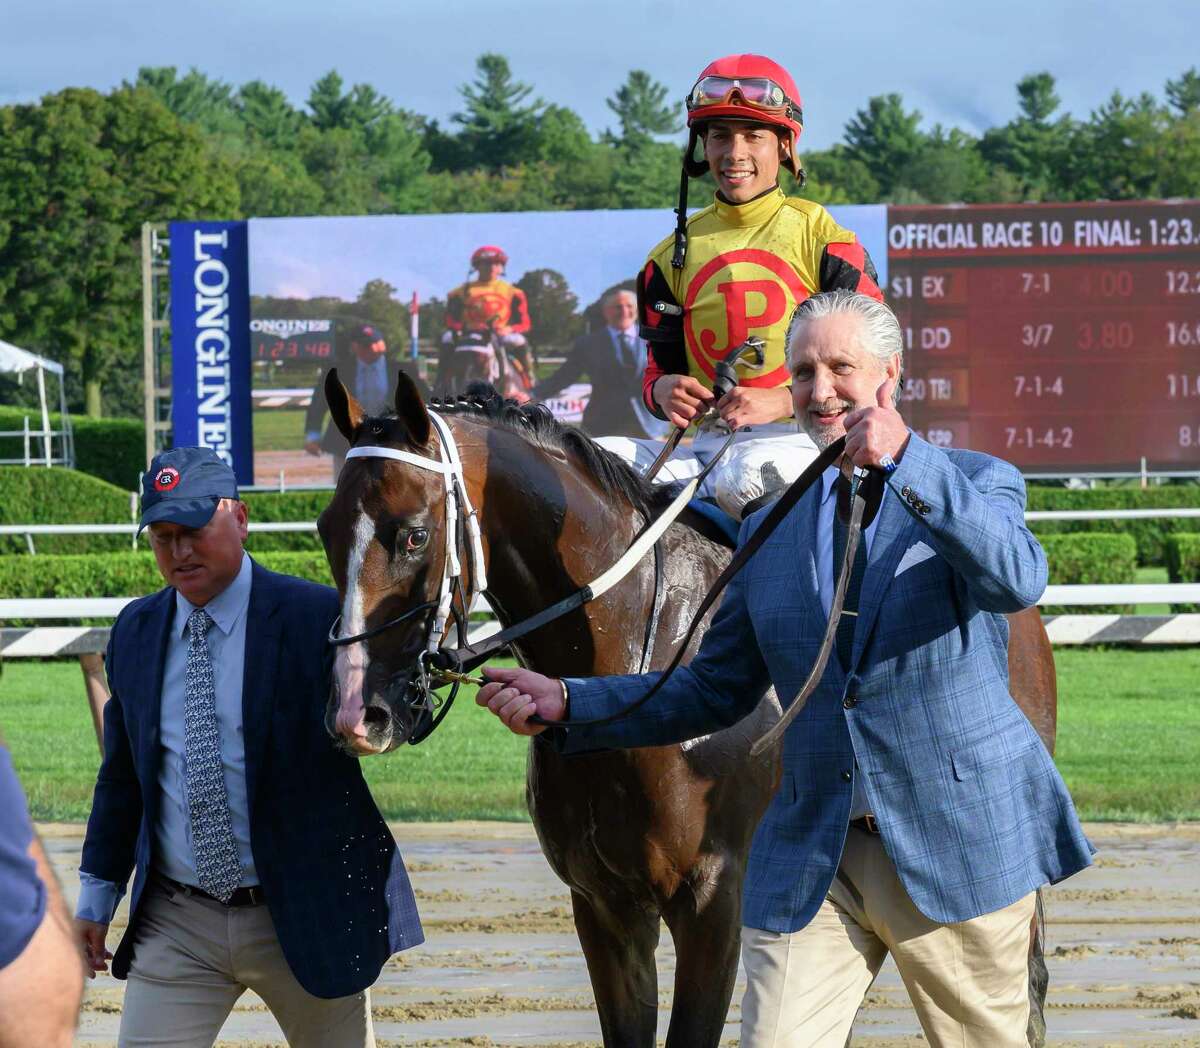 Jose Ortiz who has been crowned leading jockey for the 2019 meeting is all smiles after winning the 115th running of The Runhappy Hopeful on Basin is lead to the winner?•s circle by owner Terry Green, right and assistant trainer Scott Blasi at the Saratoga Race Course Monday Sept. 2, 2019 in Saratoga Springs, N.Y. Photo Special to the Times Union by Skip Dickstein